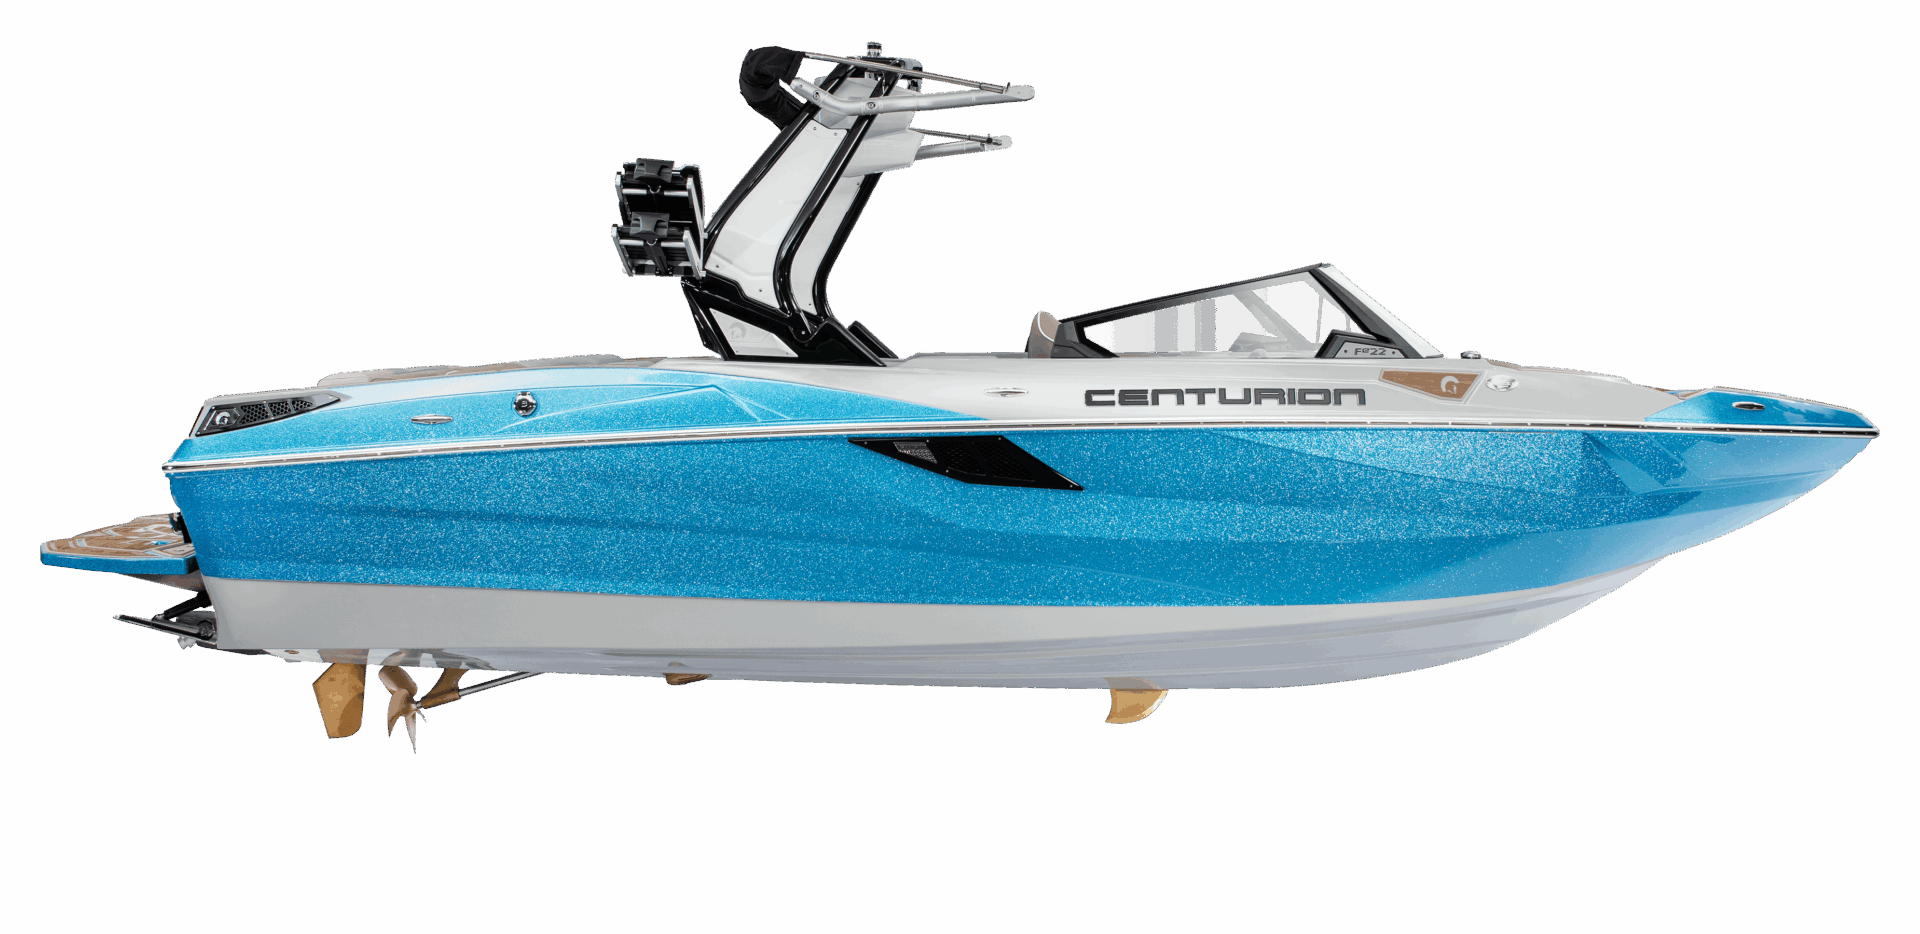 A blue and white Centurion Fe22 boat with a sleek design, featuring a tower for wakeboarding and seating area, displayed on a white background.